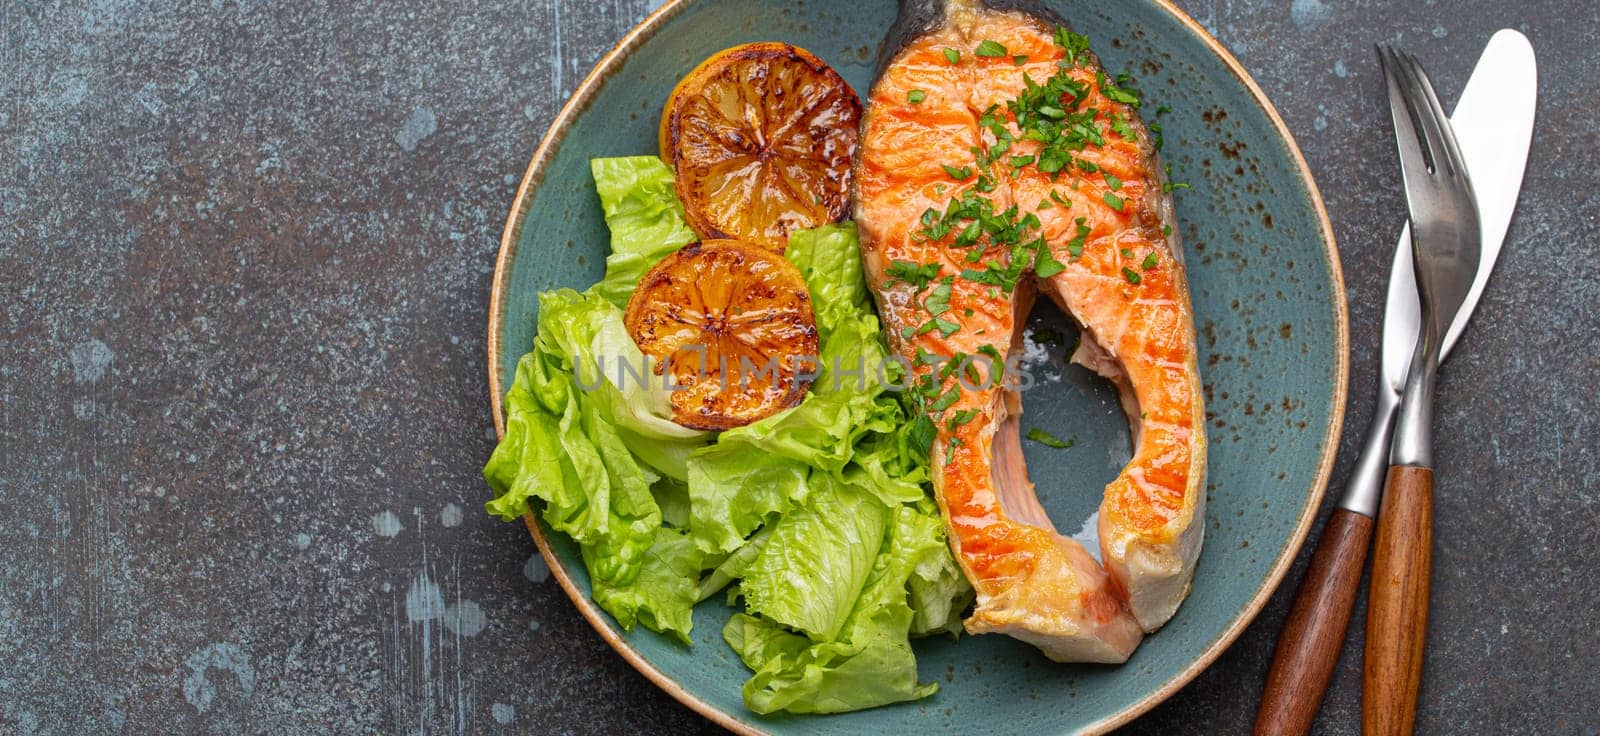 Grilled fish salmon steak and green salad with lemon on ceramic plate on rustic blue stone background top view, balanced diet or healthy nutrition meal with salmon and veggies, space for text by its_al_dente